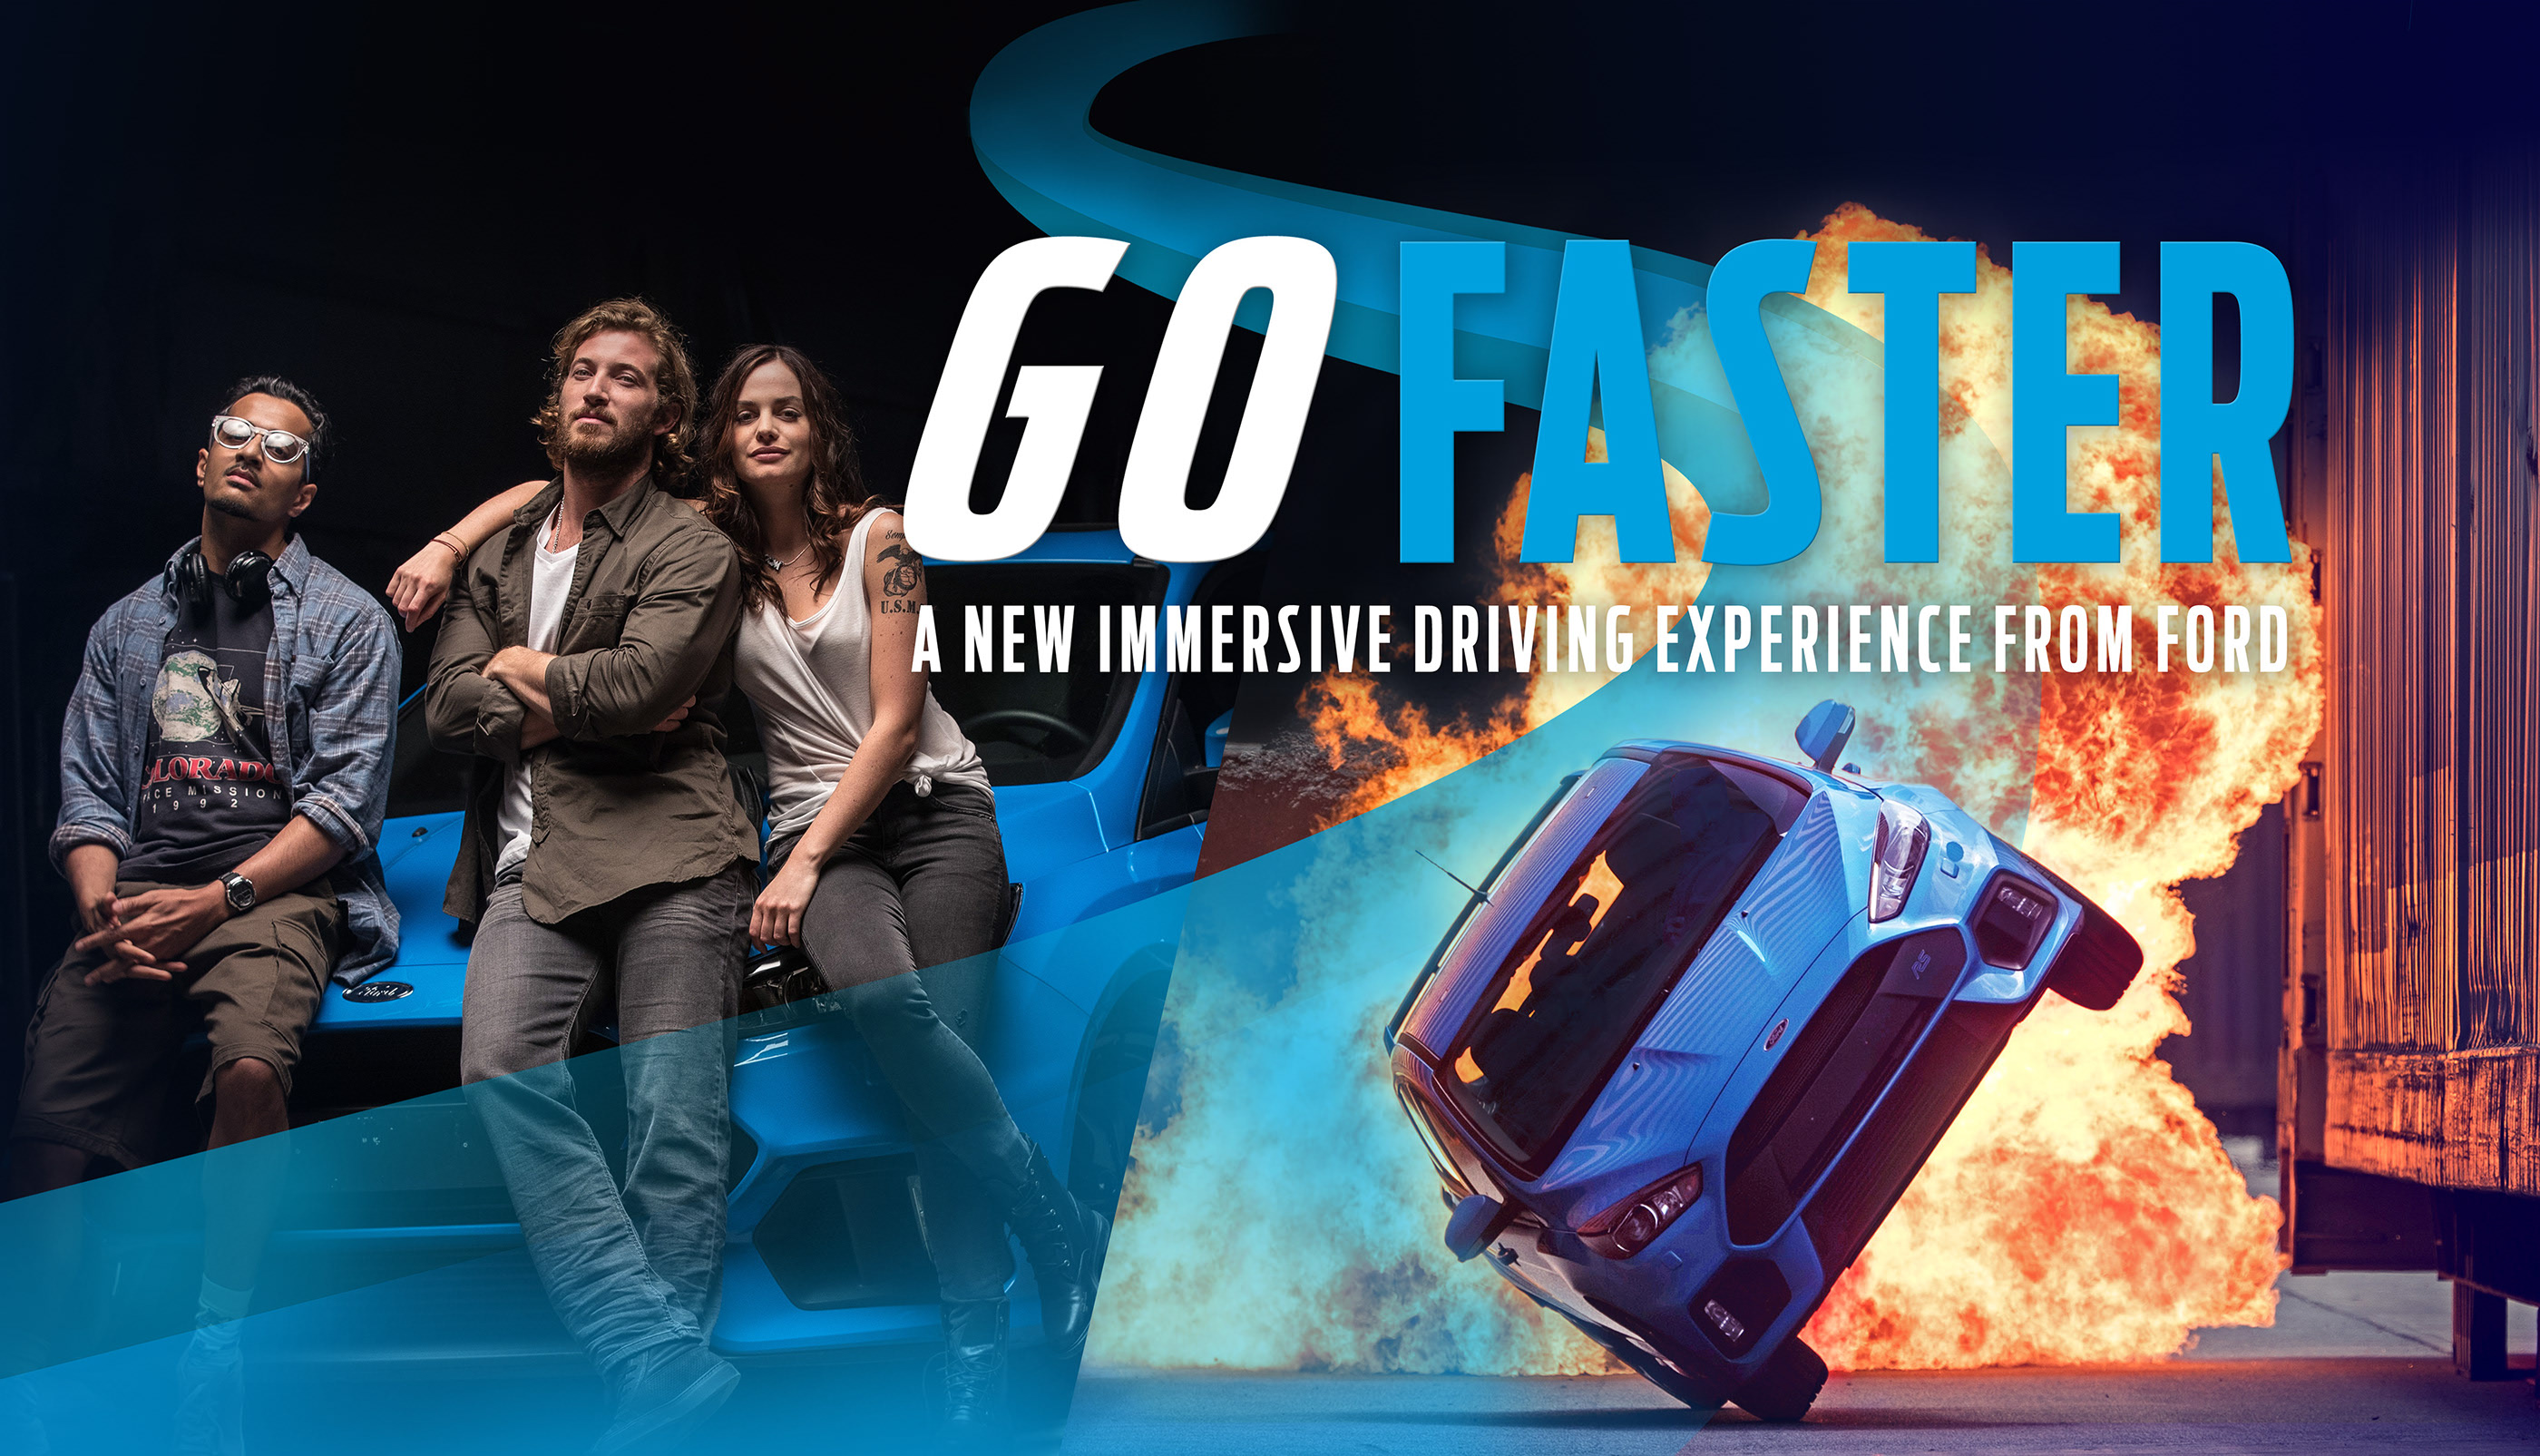 Movie Stunts. Ford experience. Stunt Driver. Ford go further. Lets go further